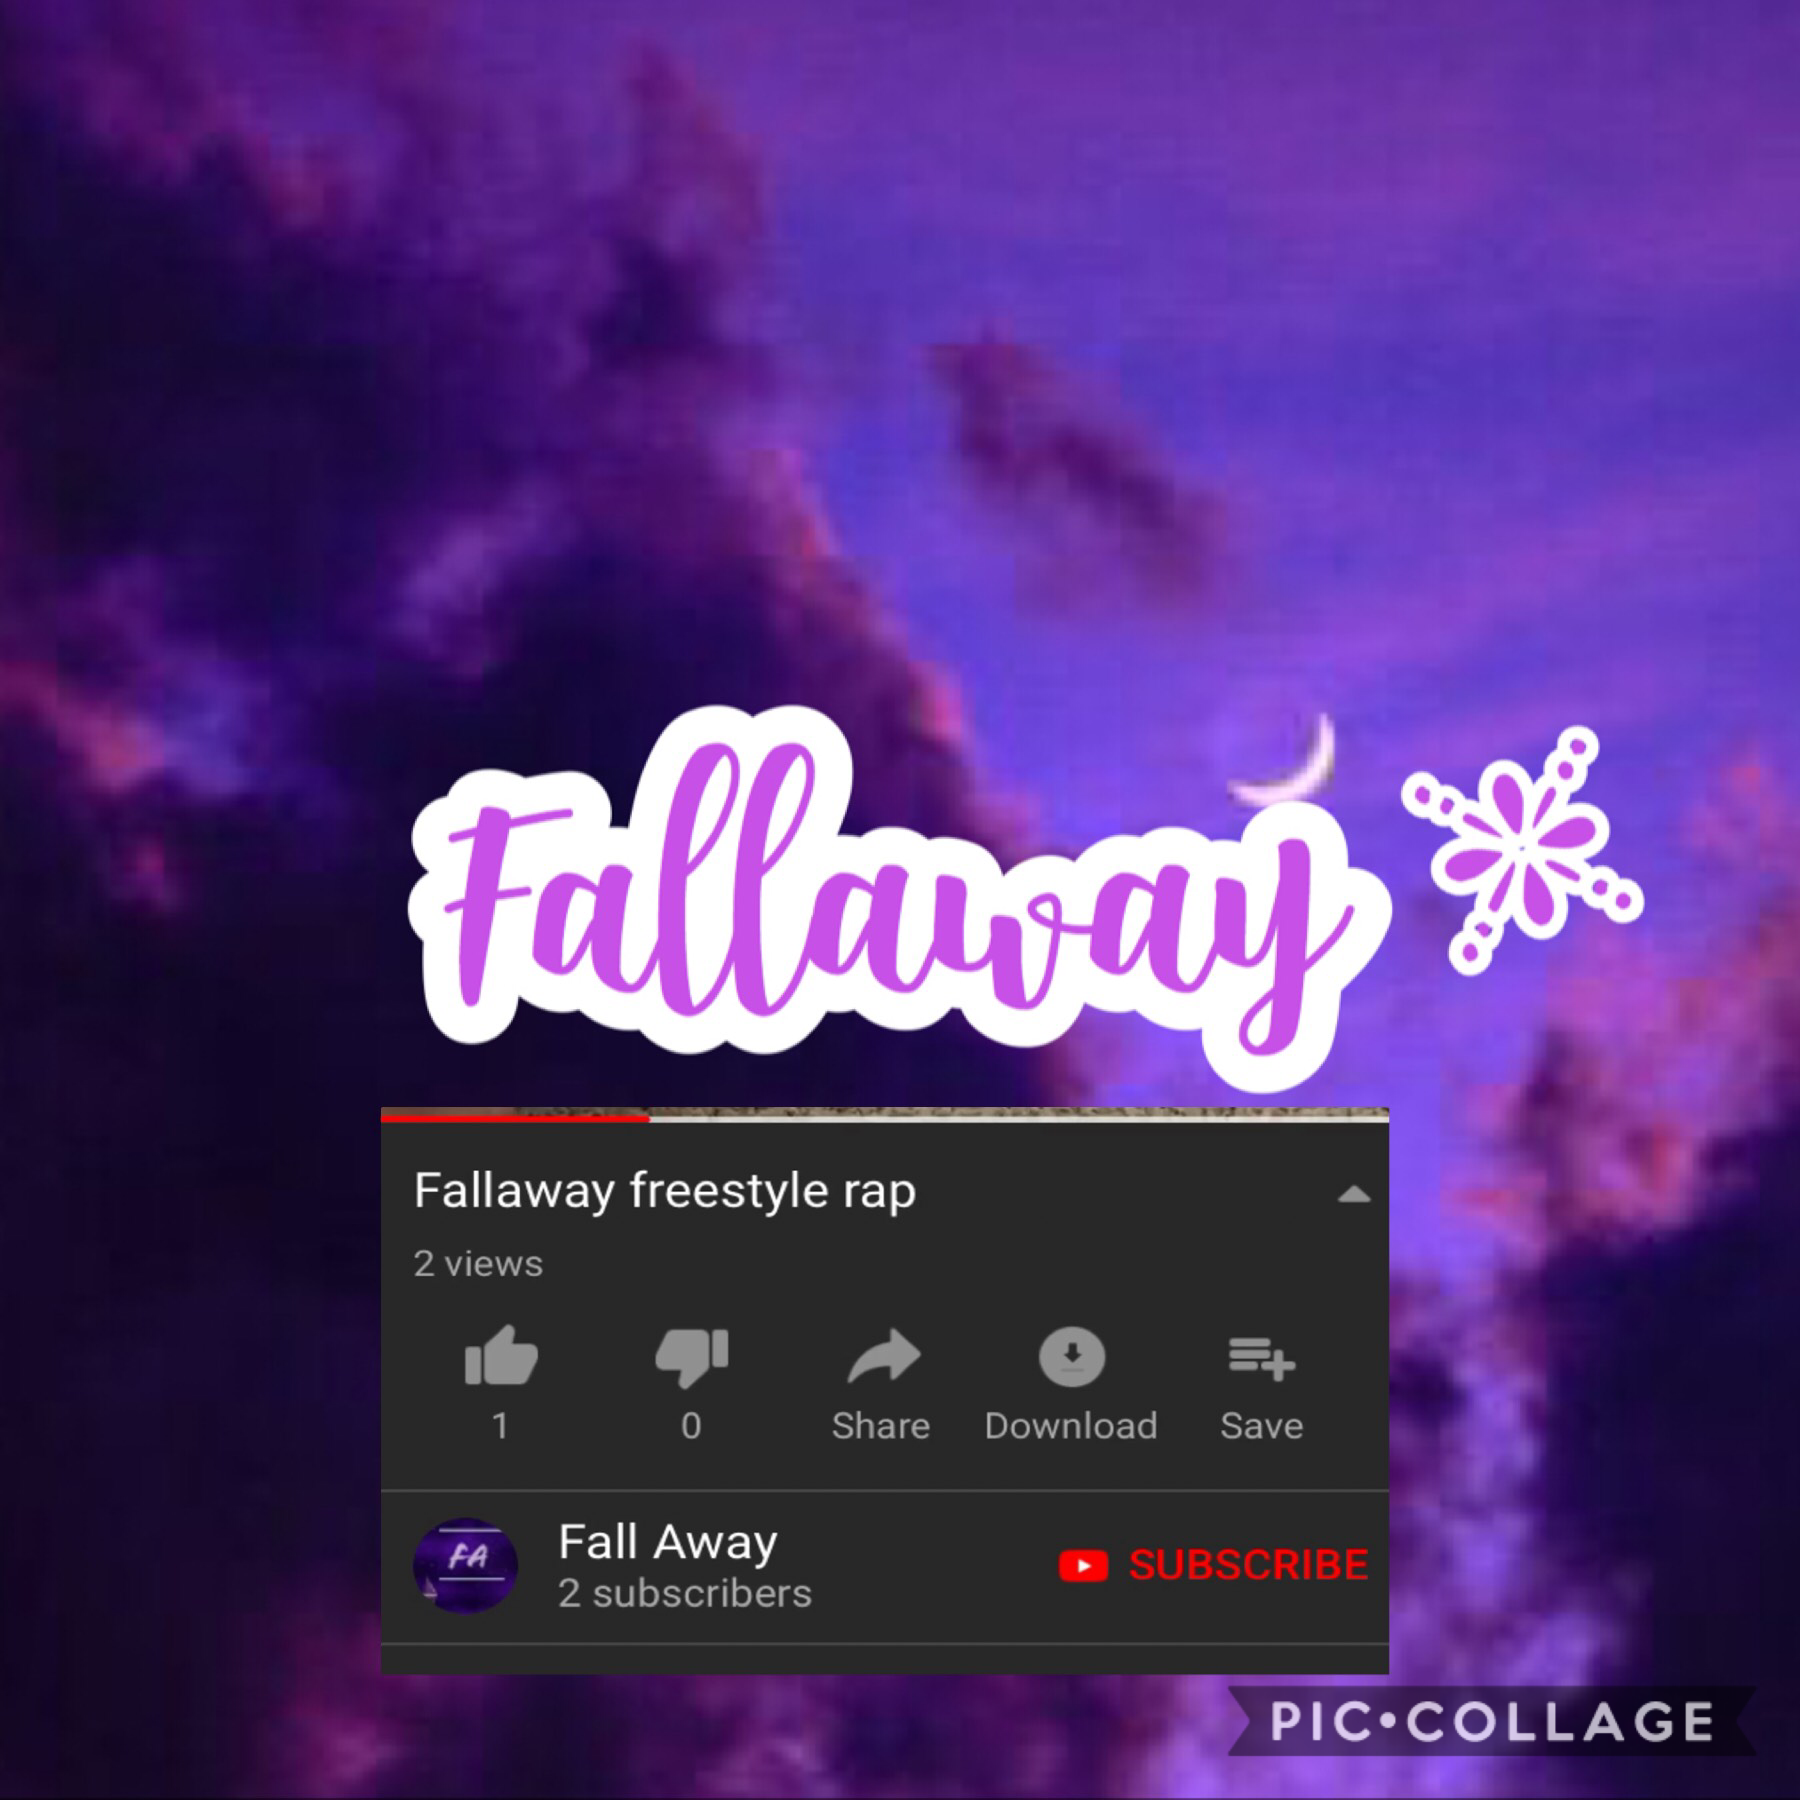 Me and my friends started a band and it’s called fallaway whoop